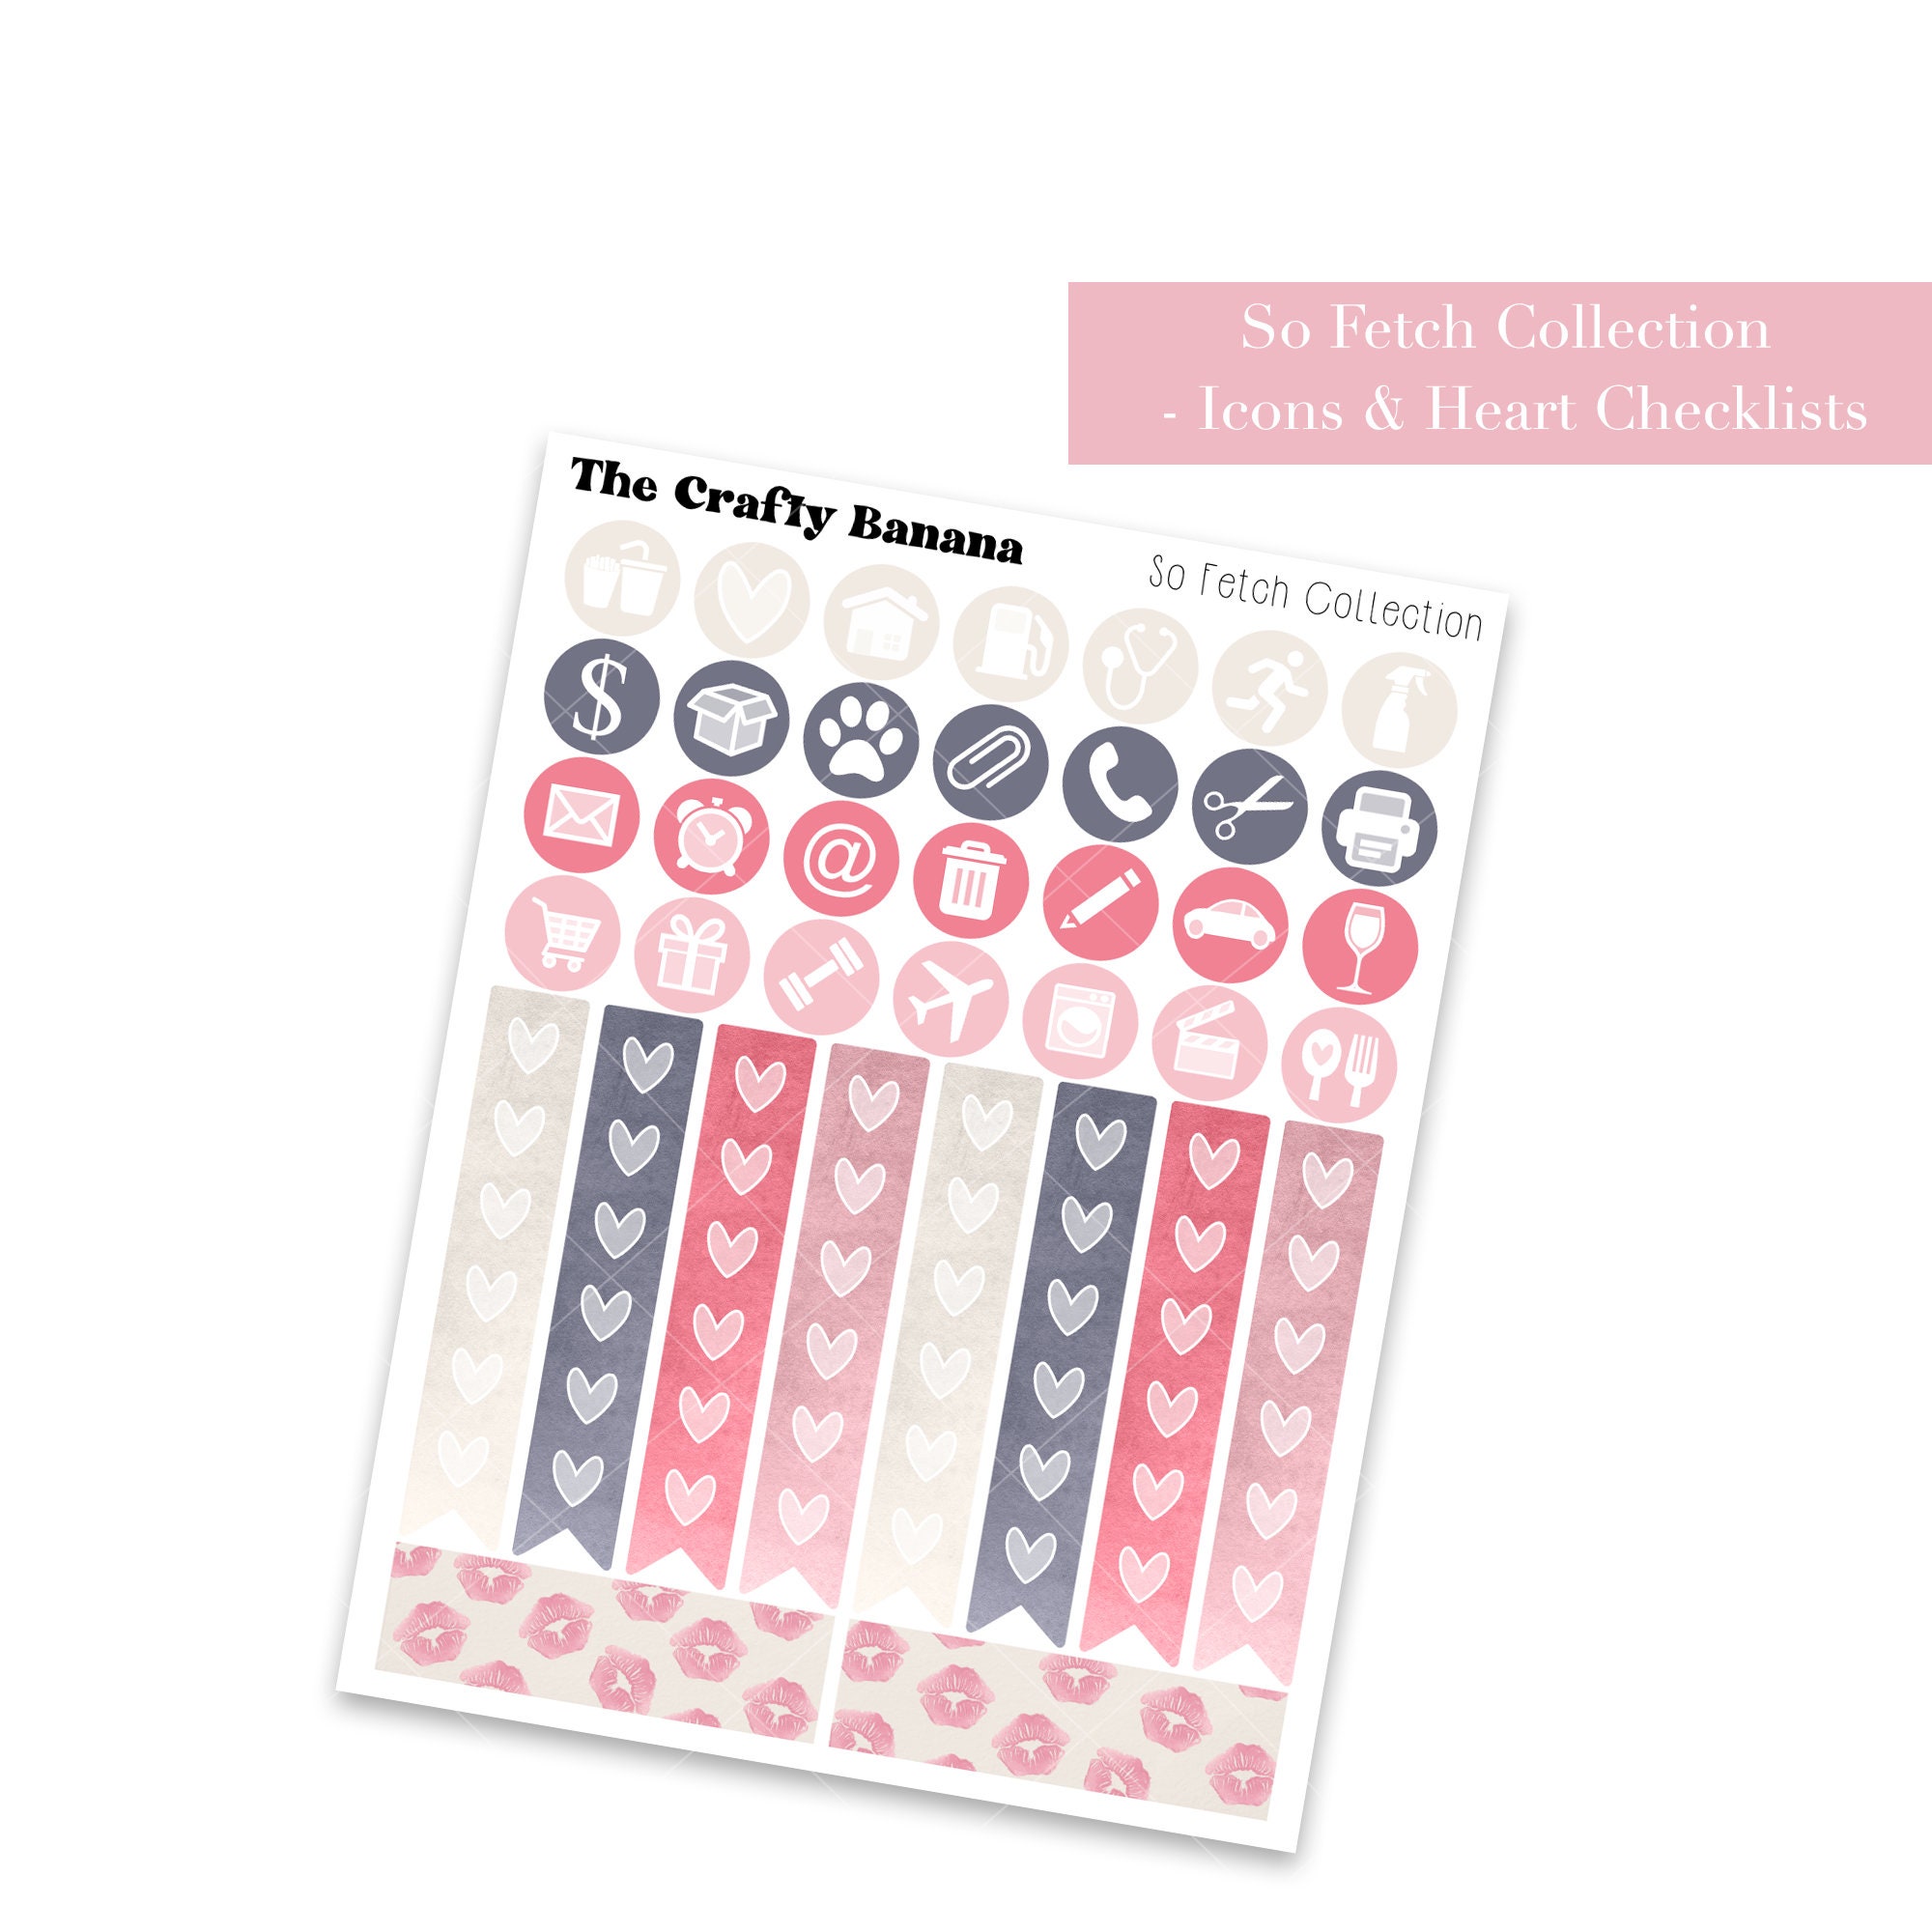 Flawed Mystery: Decorative Stickers - 10 small sheets – The Crafty Banana